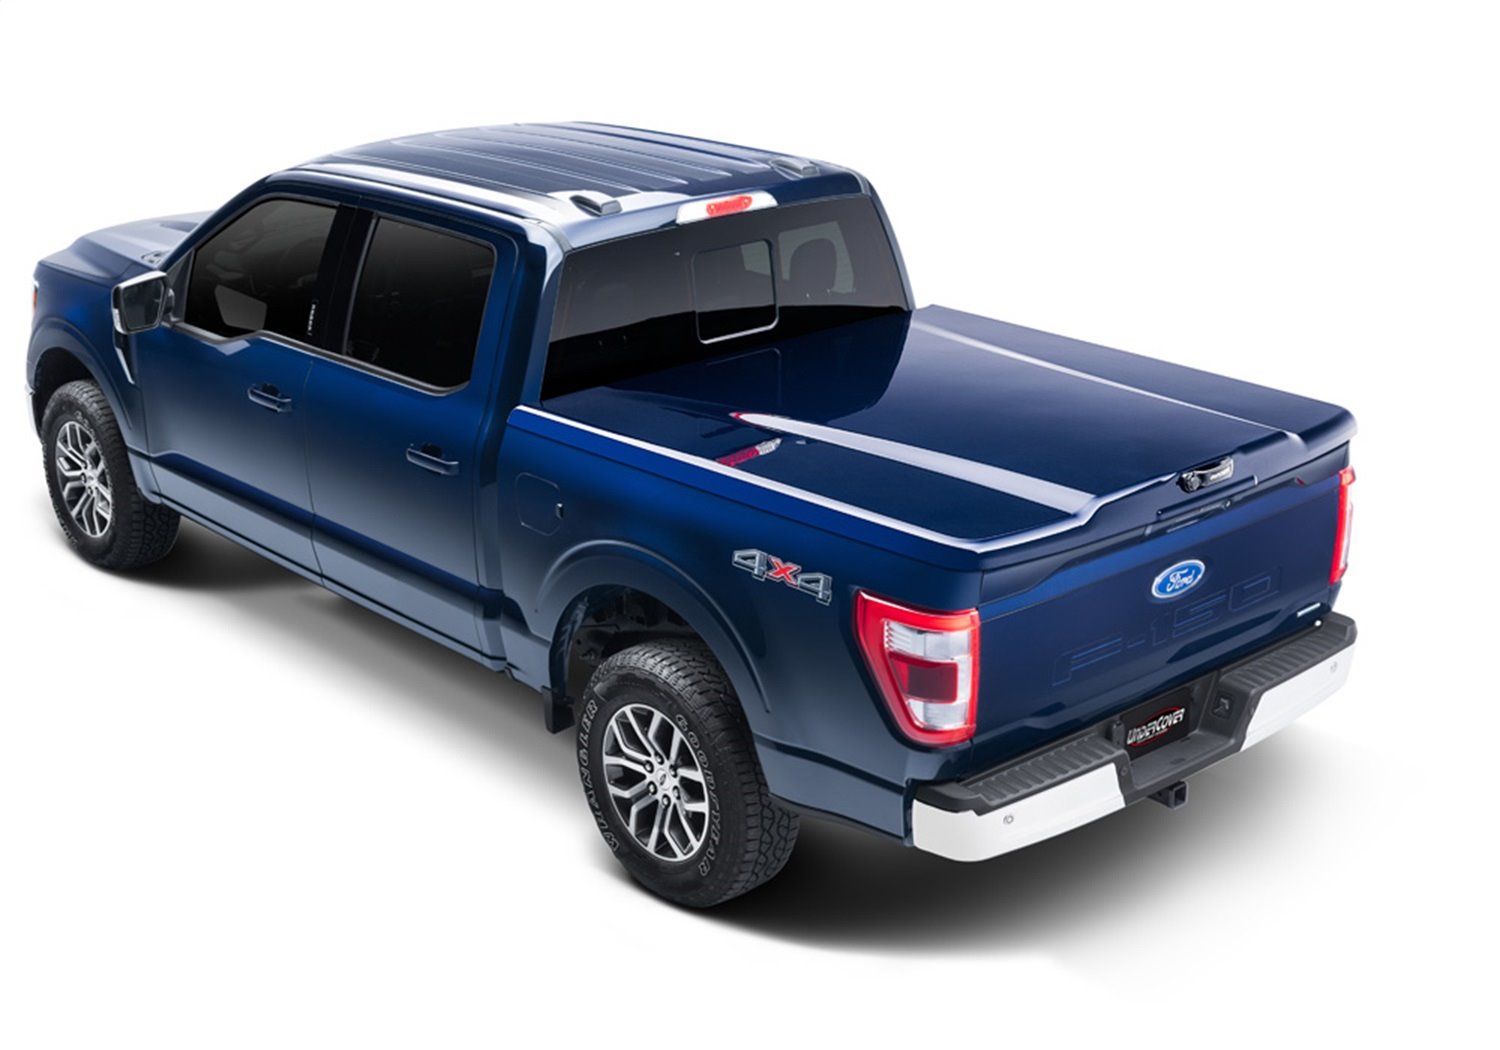 UC2208L-YZ Elite LX Hard Non-Folding Cover, Fits Select Ford F-150 5'7" Bed Crew (Includes Lightning) YZ Oxford White